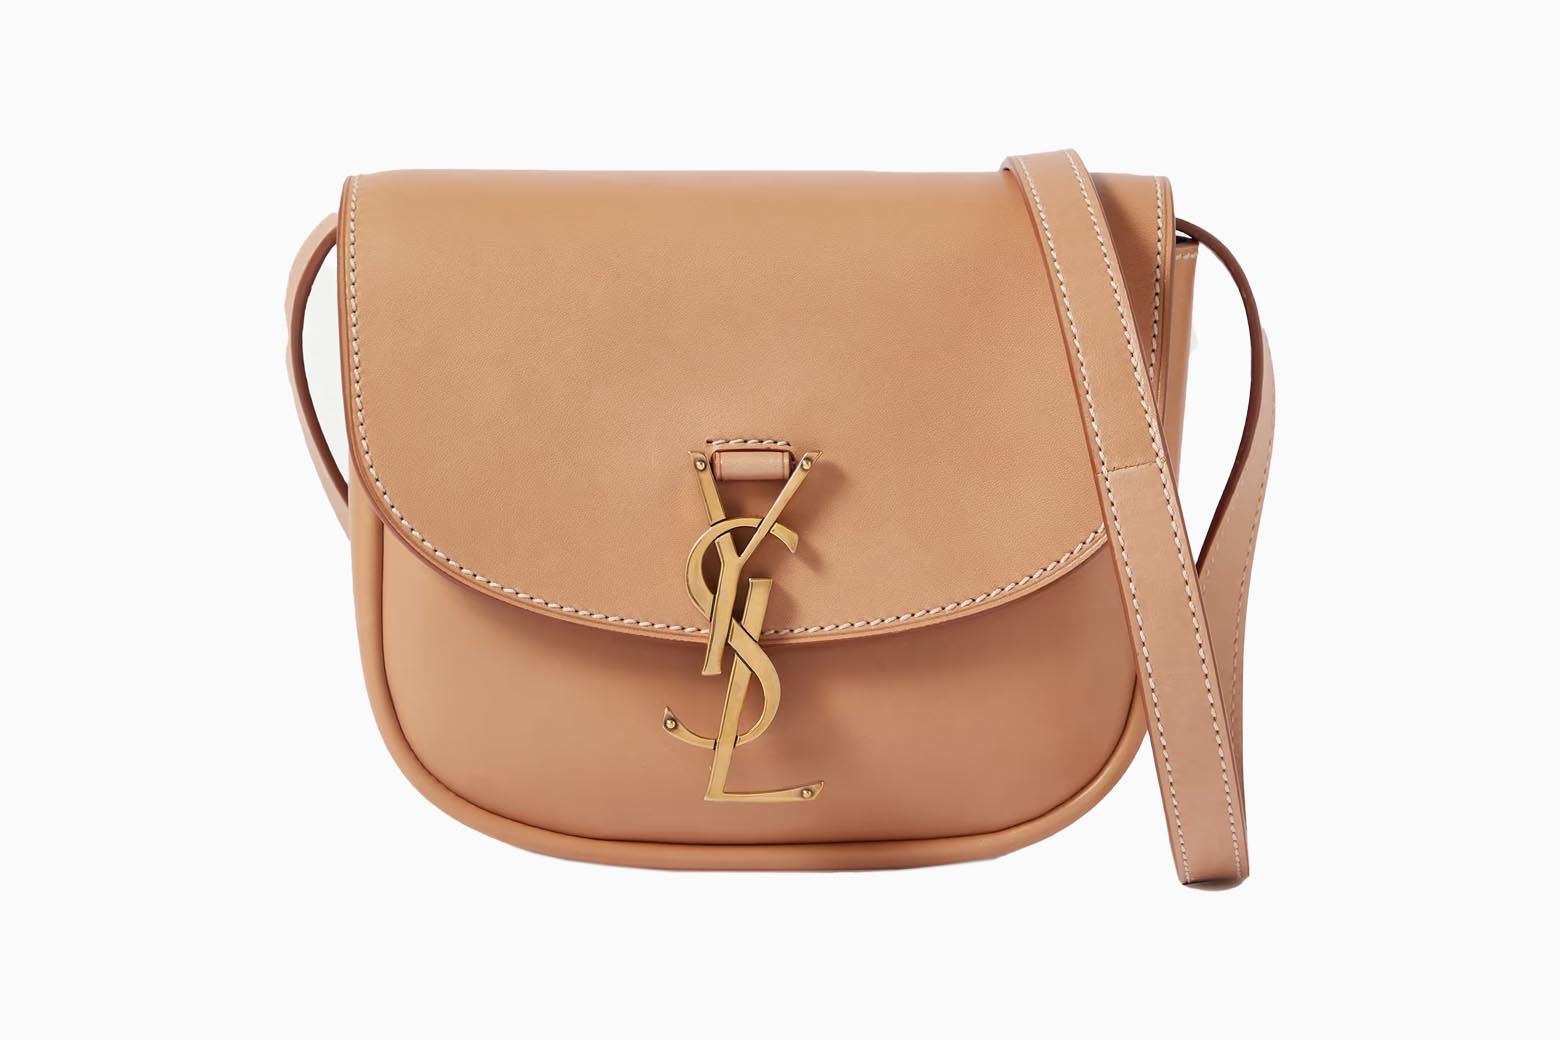 21 Best YSL Bags Most Popular Saint Laurent Bags To Invest In